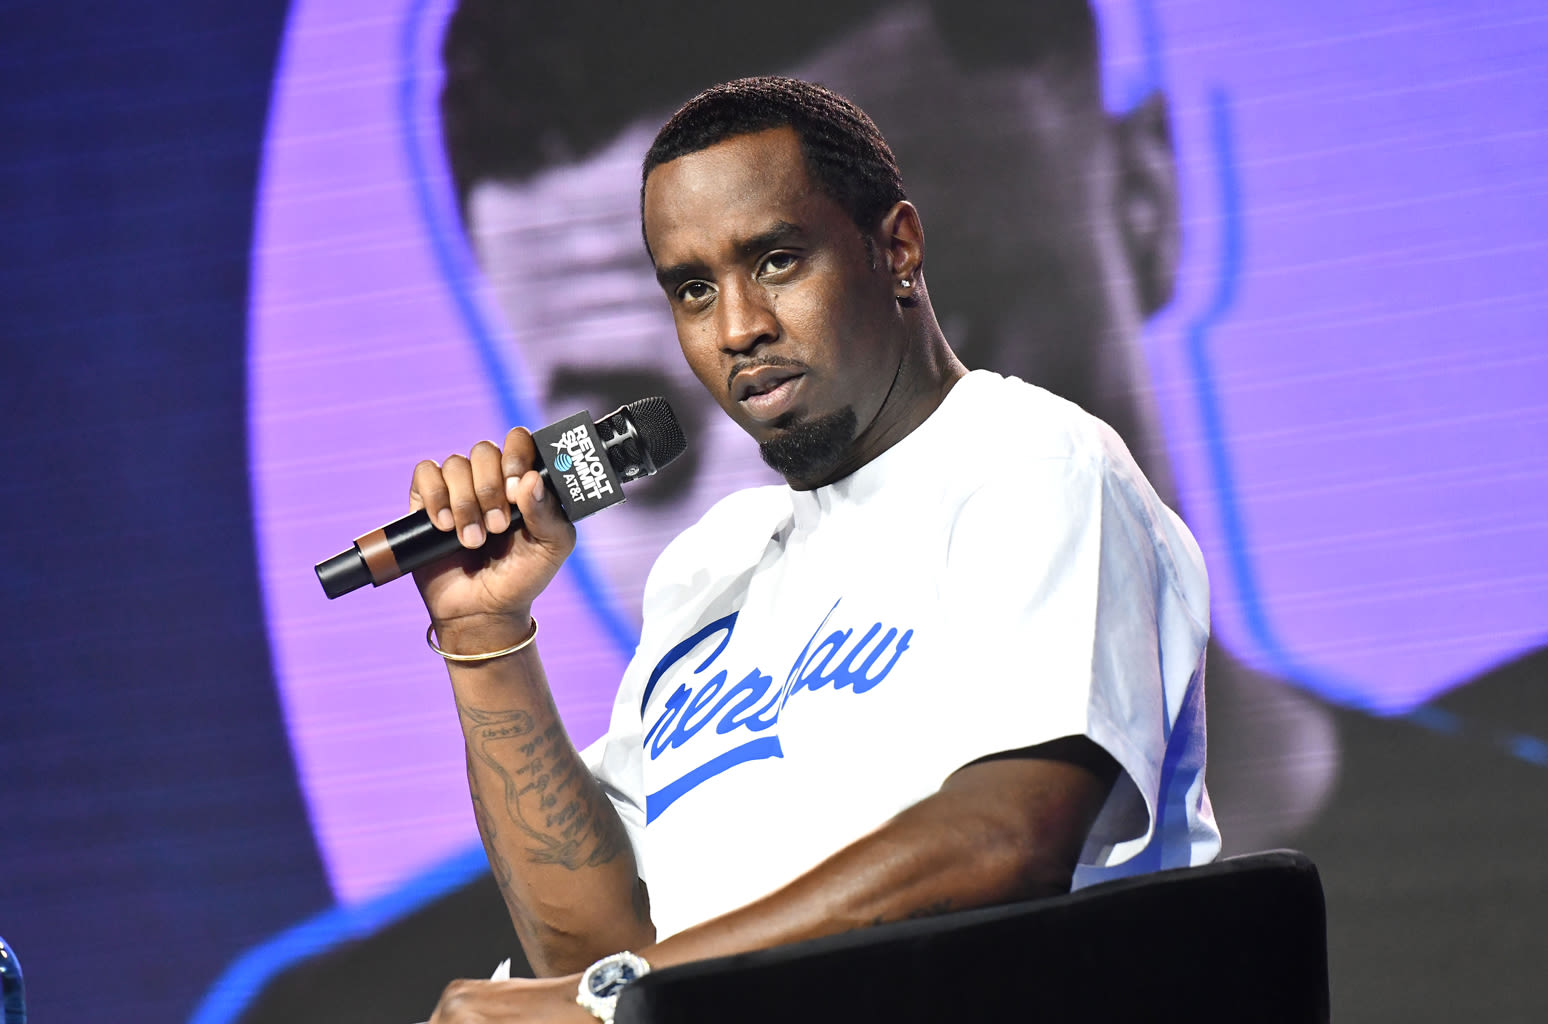 Diddy’s Accusers Speak Out for First Time in Wake of Sexual Misconduct Allegations: ‘This Guy Got No Soul’